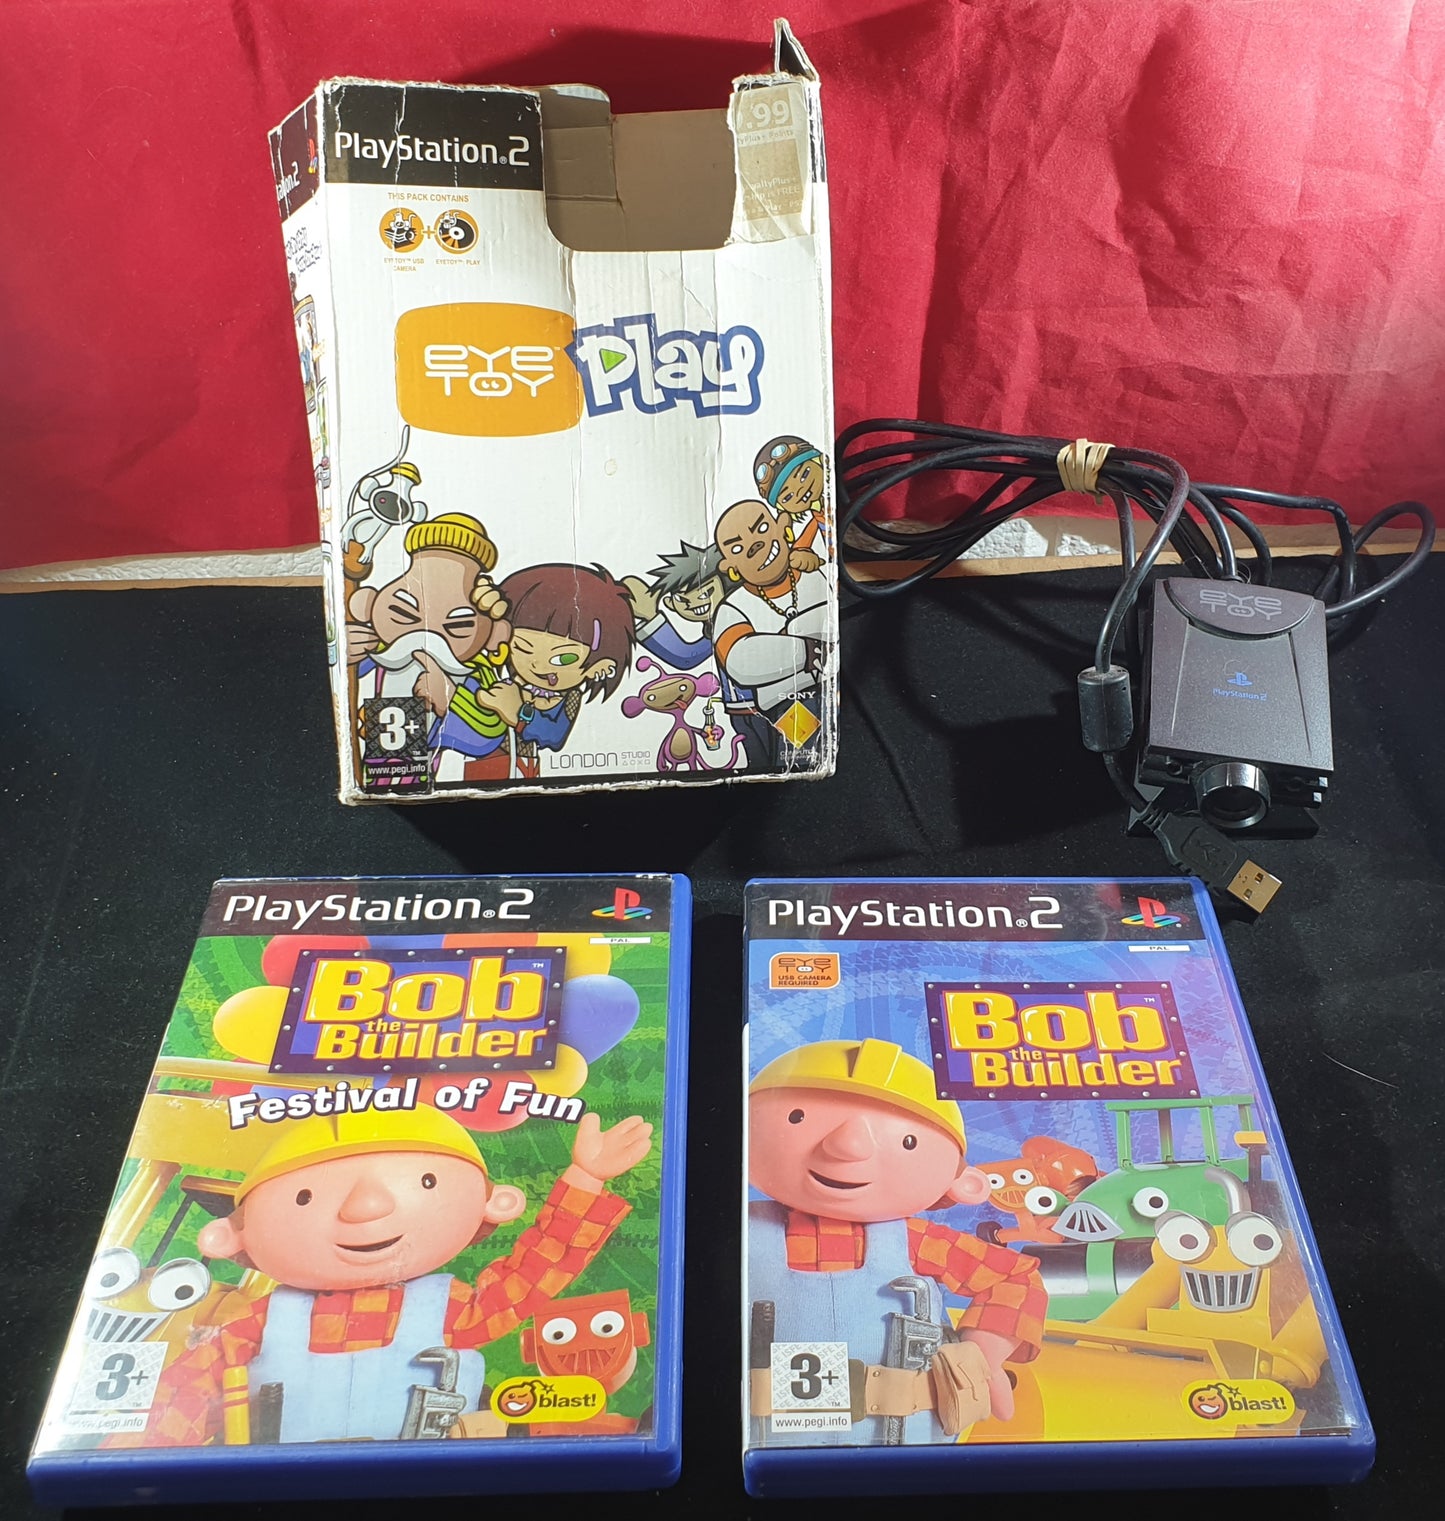 Boxed Eyetoy Camera Accessory with Bob the Builder & Festival of Fun Games Sony Playstation 2 (PS2)